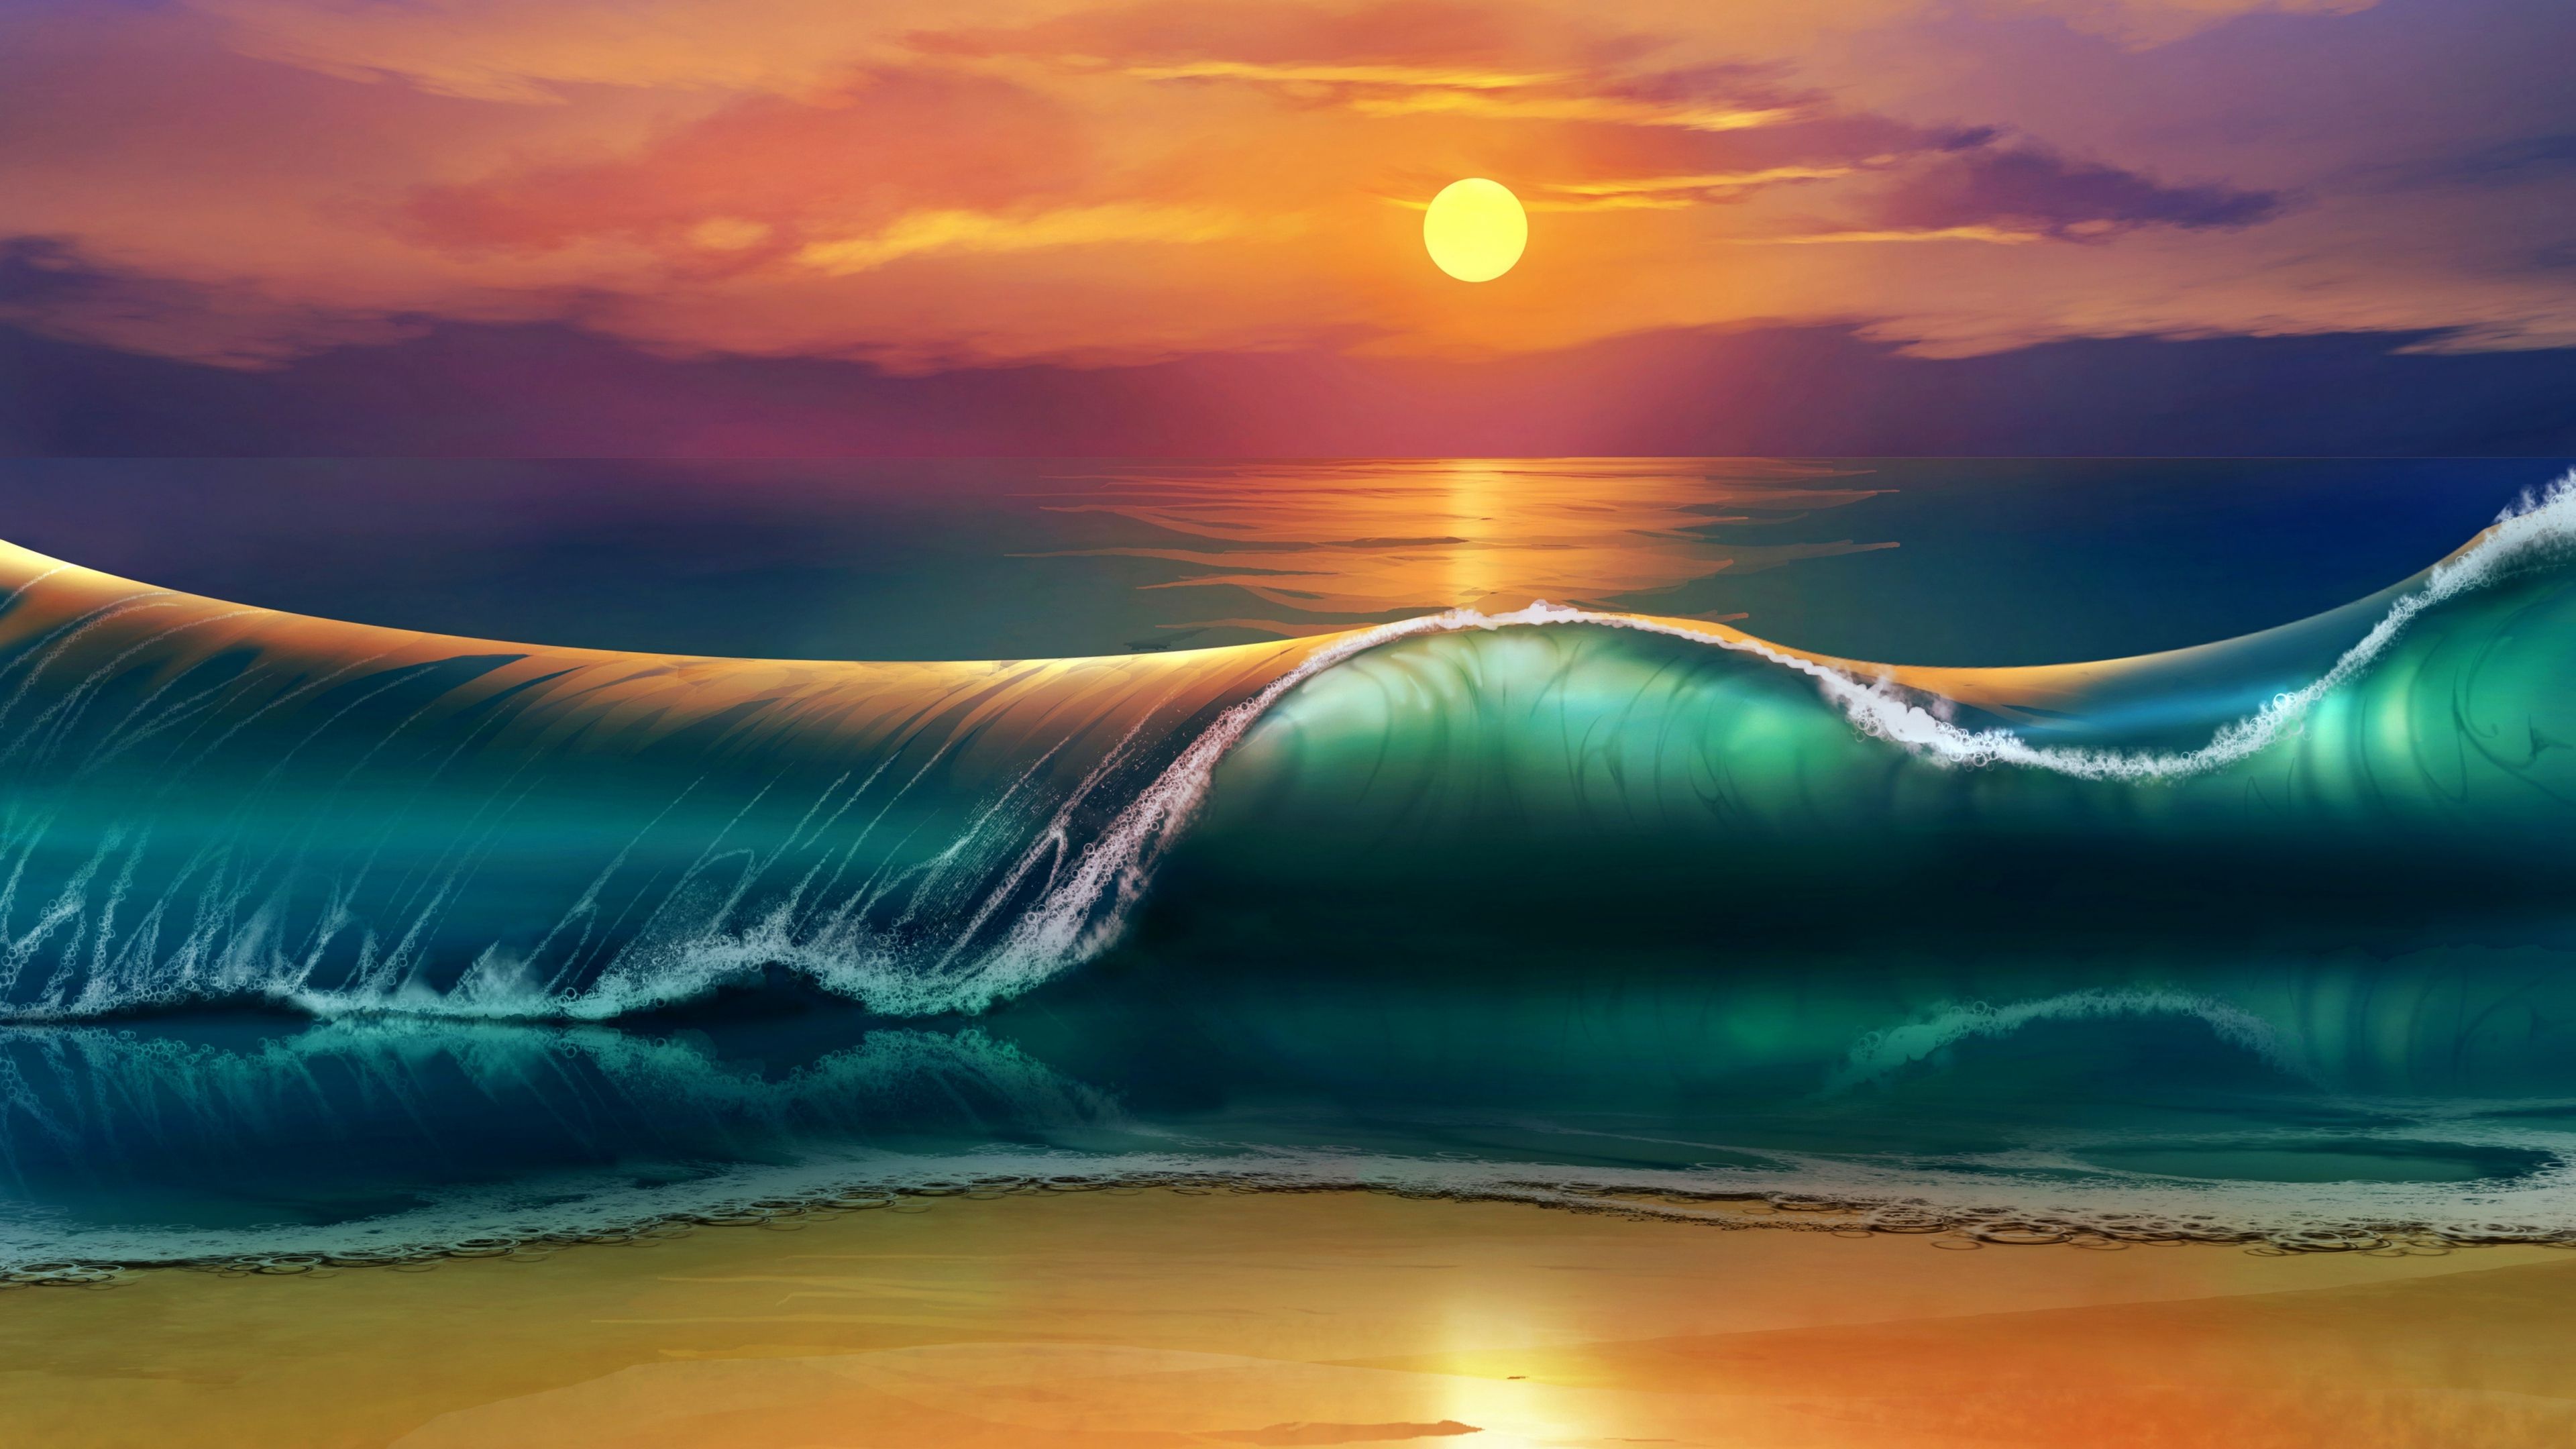 The Sunset Art, HD Artist, 4k Wallpaper, Image, Background, Photo and Picture